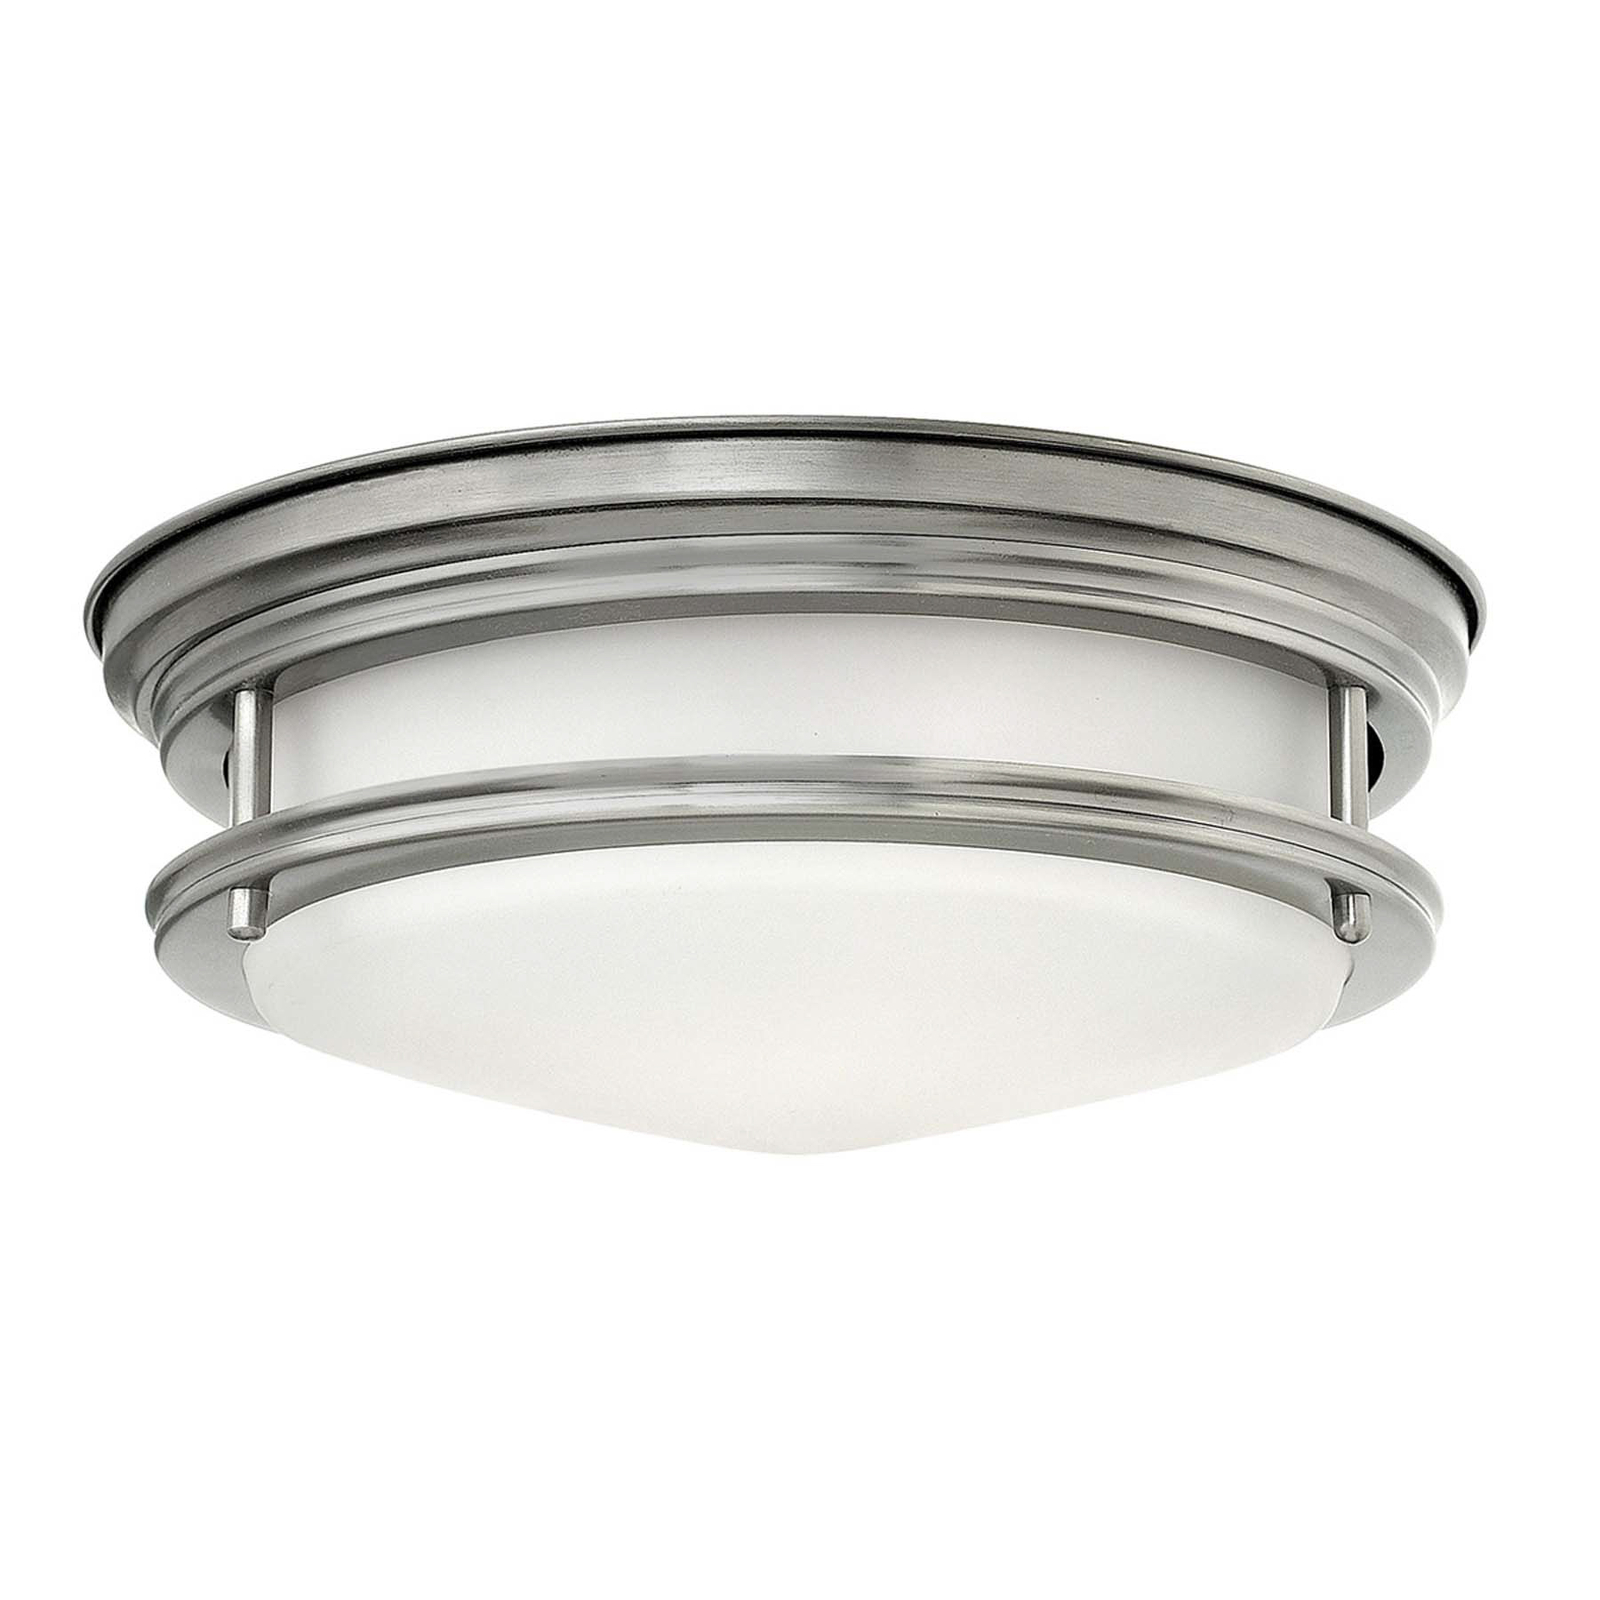 Hadrian outdoor ceiling light, antique nickel/opal white